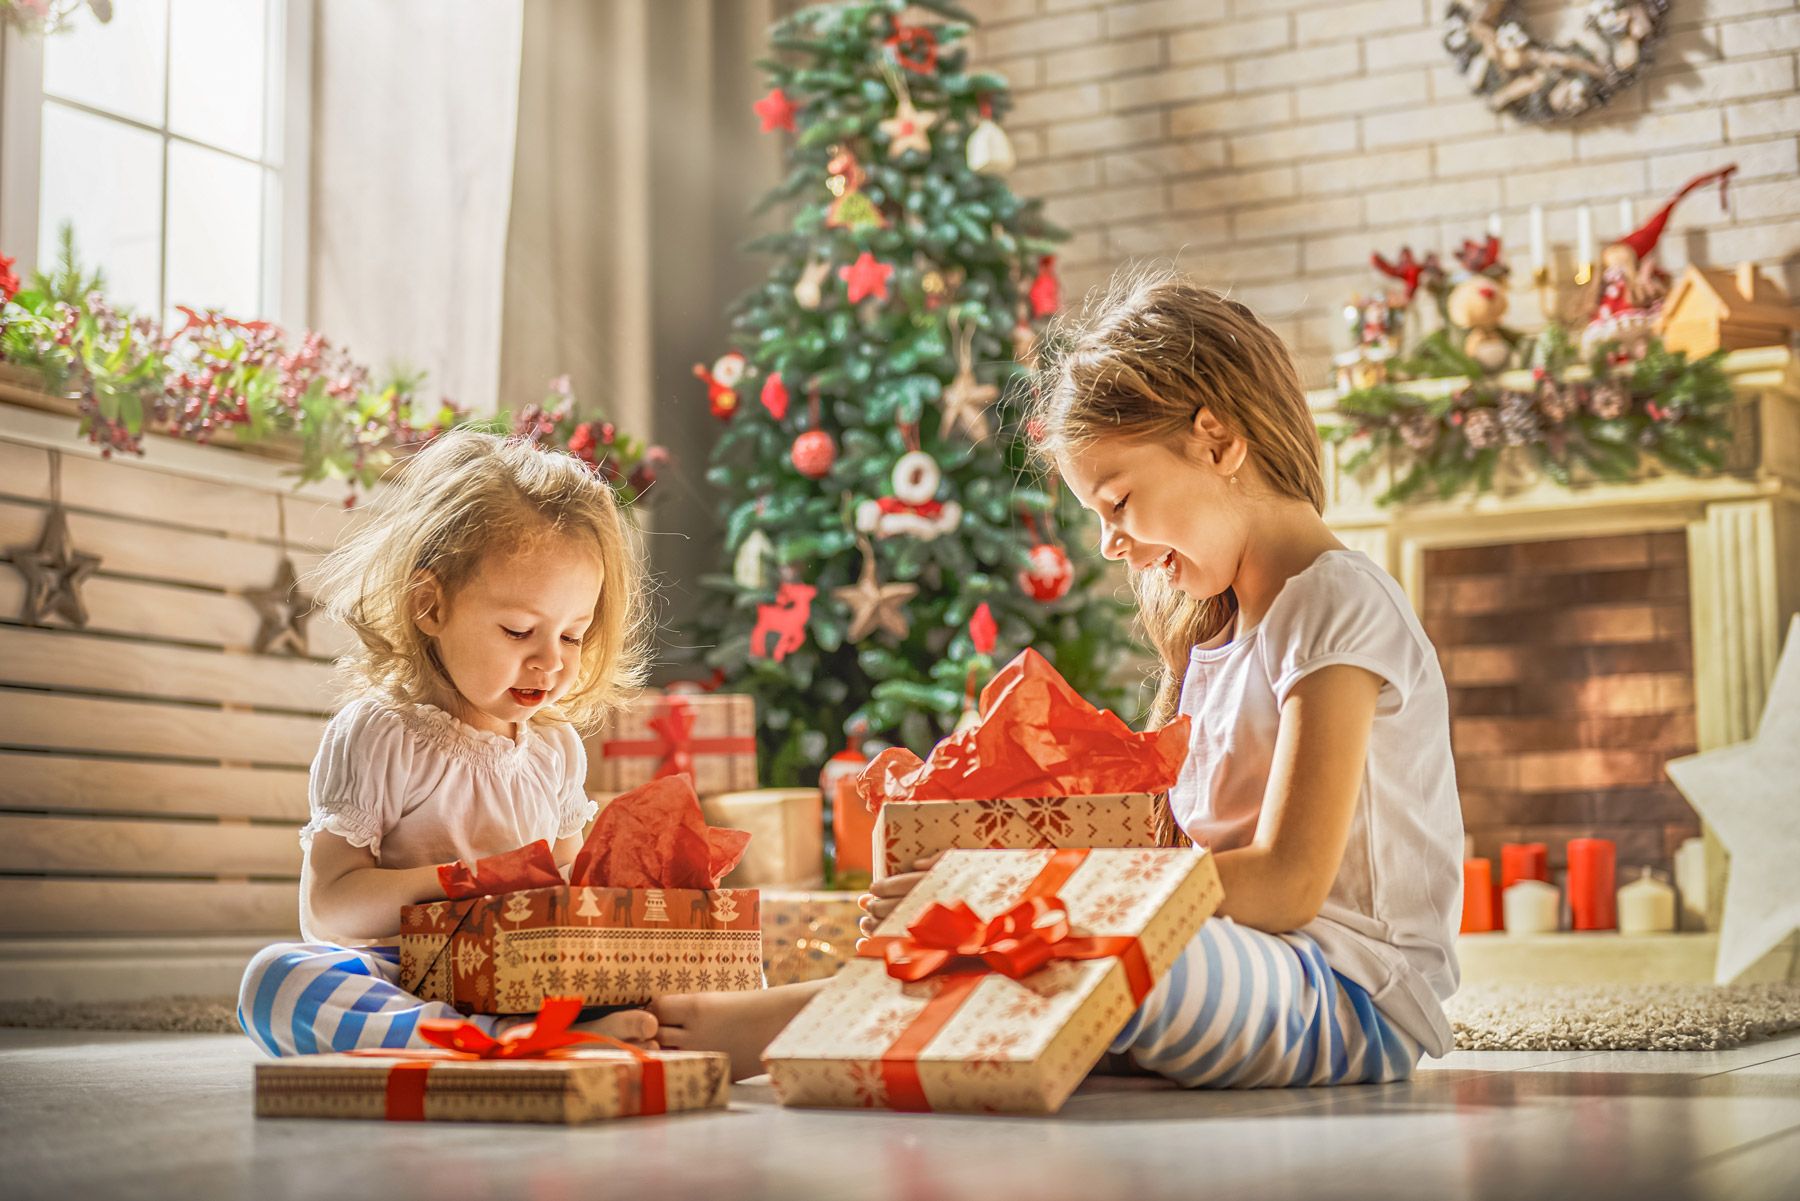 9 Amazing Christmas Vacation Ideas for Families  BEACHES